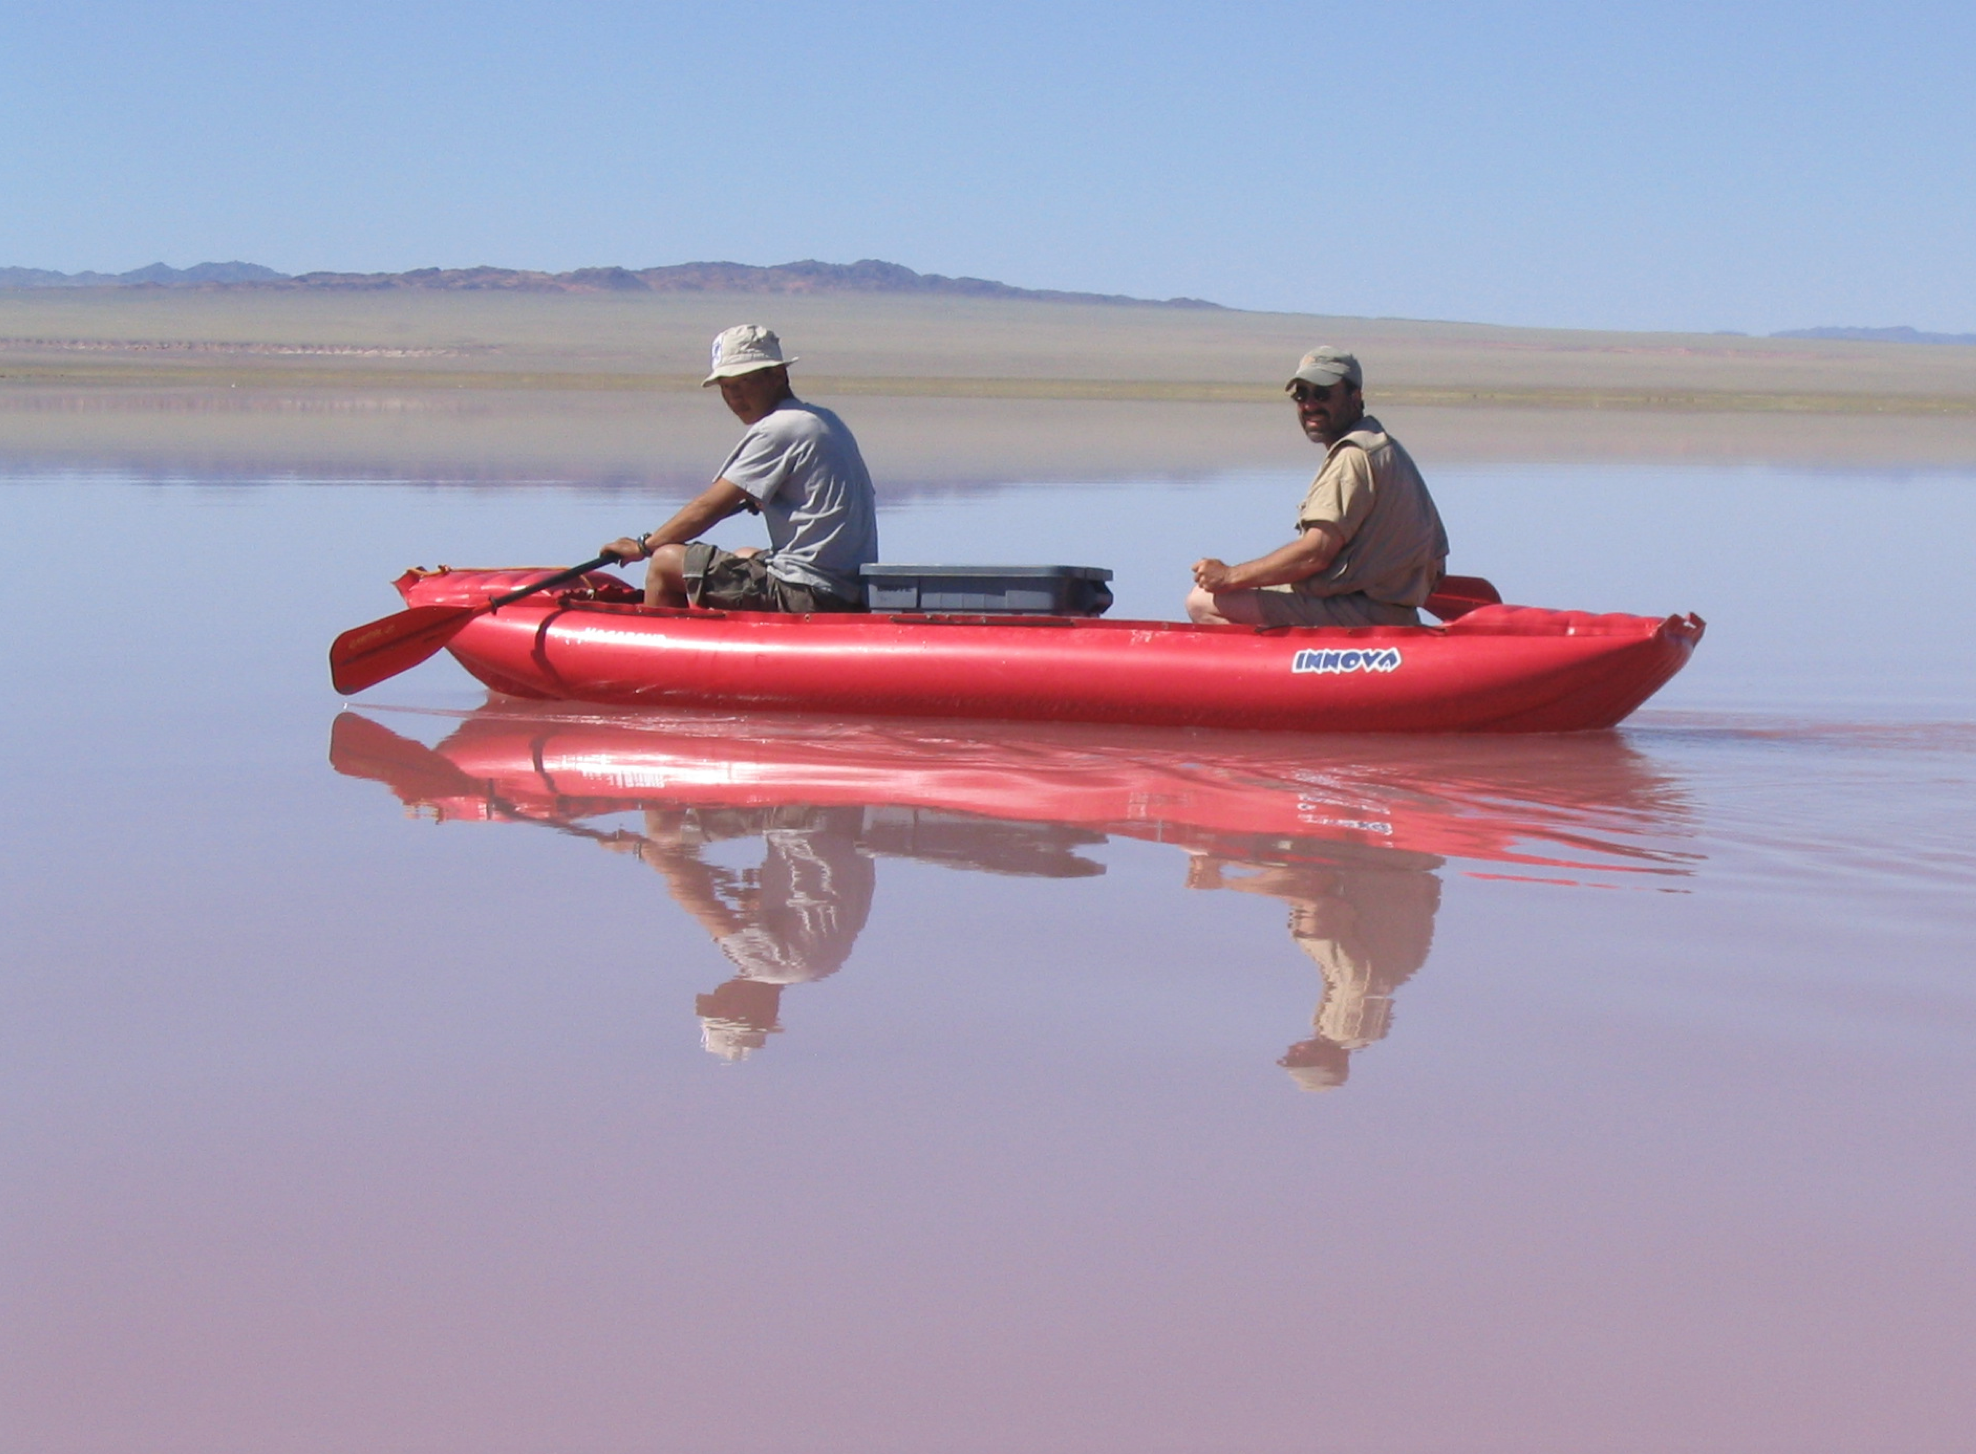 Two scientists on a red-colored lake in Mongolia